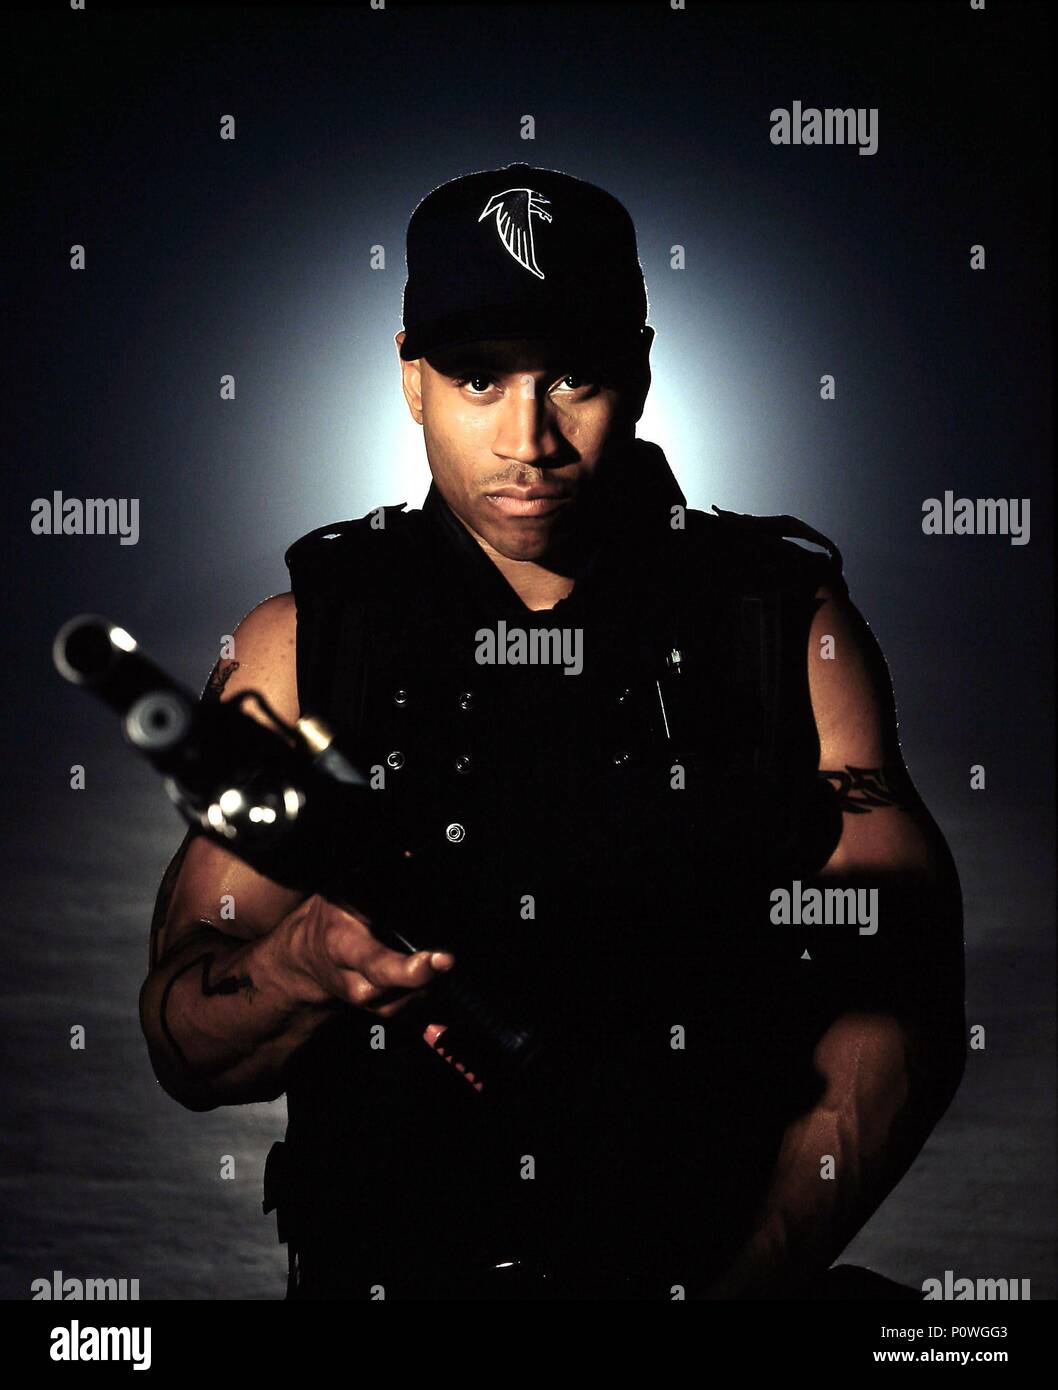 Original Film Title: S. W. A. T..  English Title: S. W. A. T..  Film Director: CLARK JOHNSON.  Year: 2003.  Stars: LL COOL J. Credit: COLUMBIA PICTURES / WHITE, TIMOTHY / Album Stock Photo